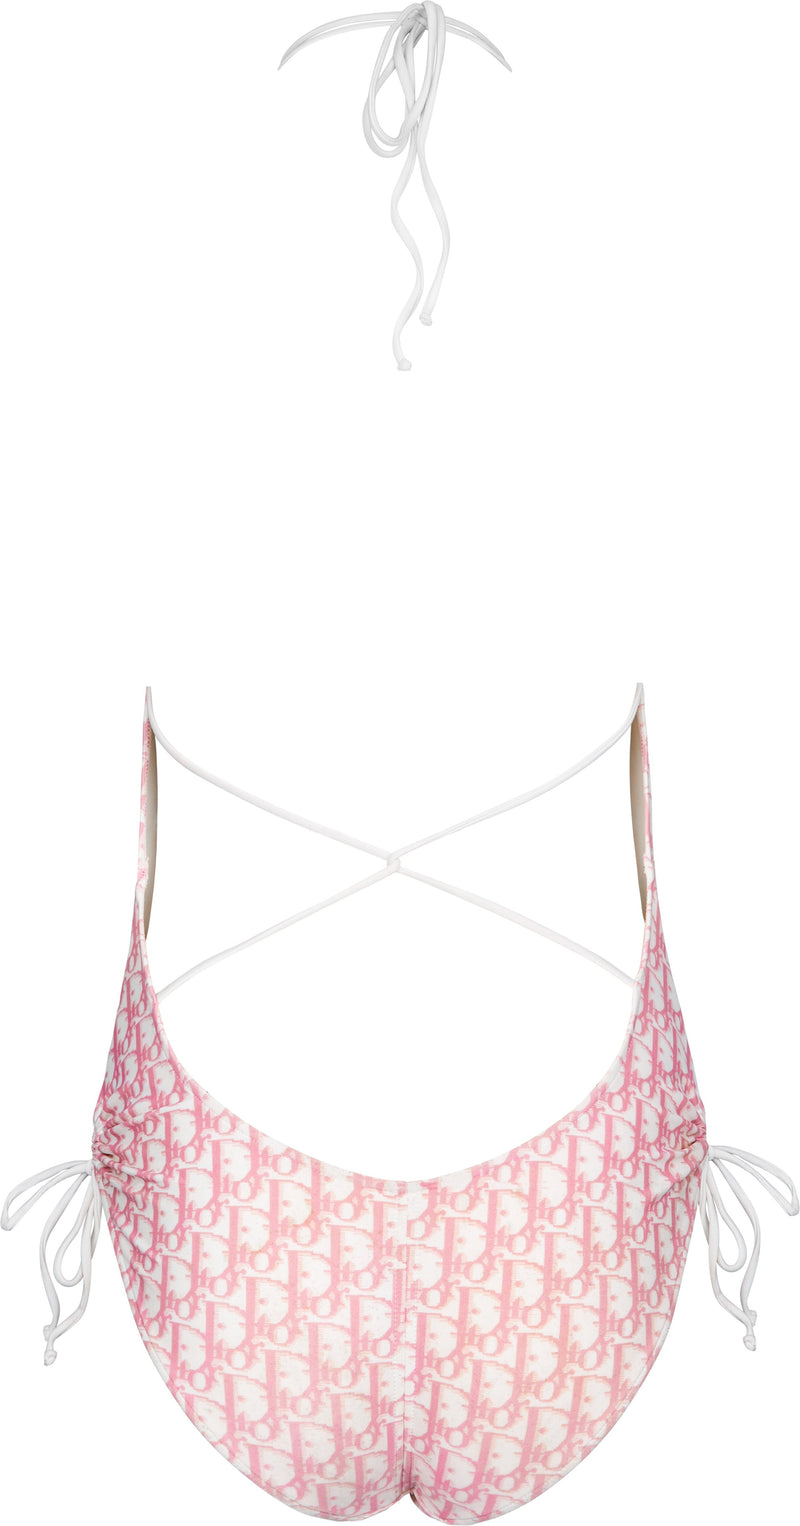 Christian Dior Diorissimo Girly Embellished One-Piece